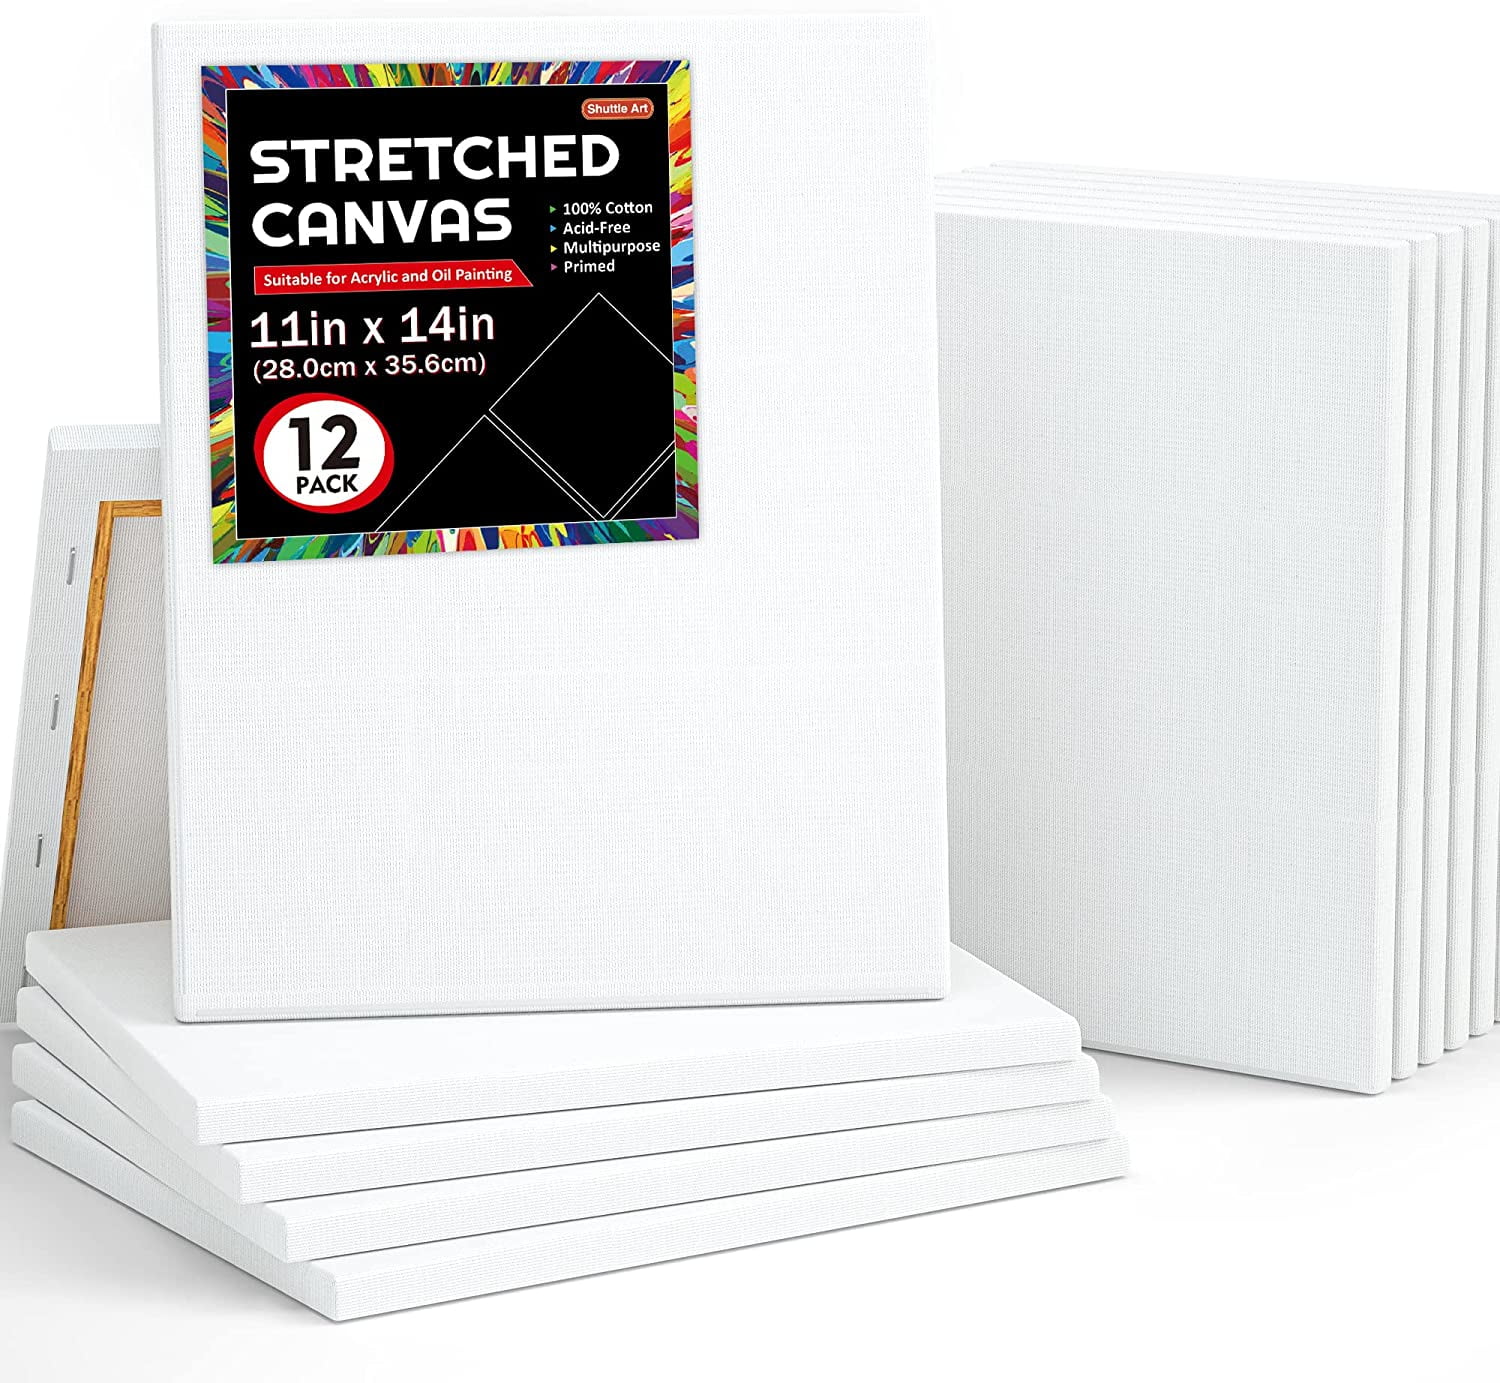  Sargent Art 20 x 20 inch Stretched Canvas, Blank White Canvases,  Double Acrylic Titanium Priming, Perfect for Acrylic, Oil, and Art  Projects, Acrylic Pouring & Wet Media